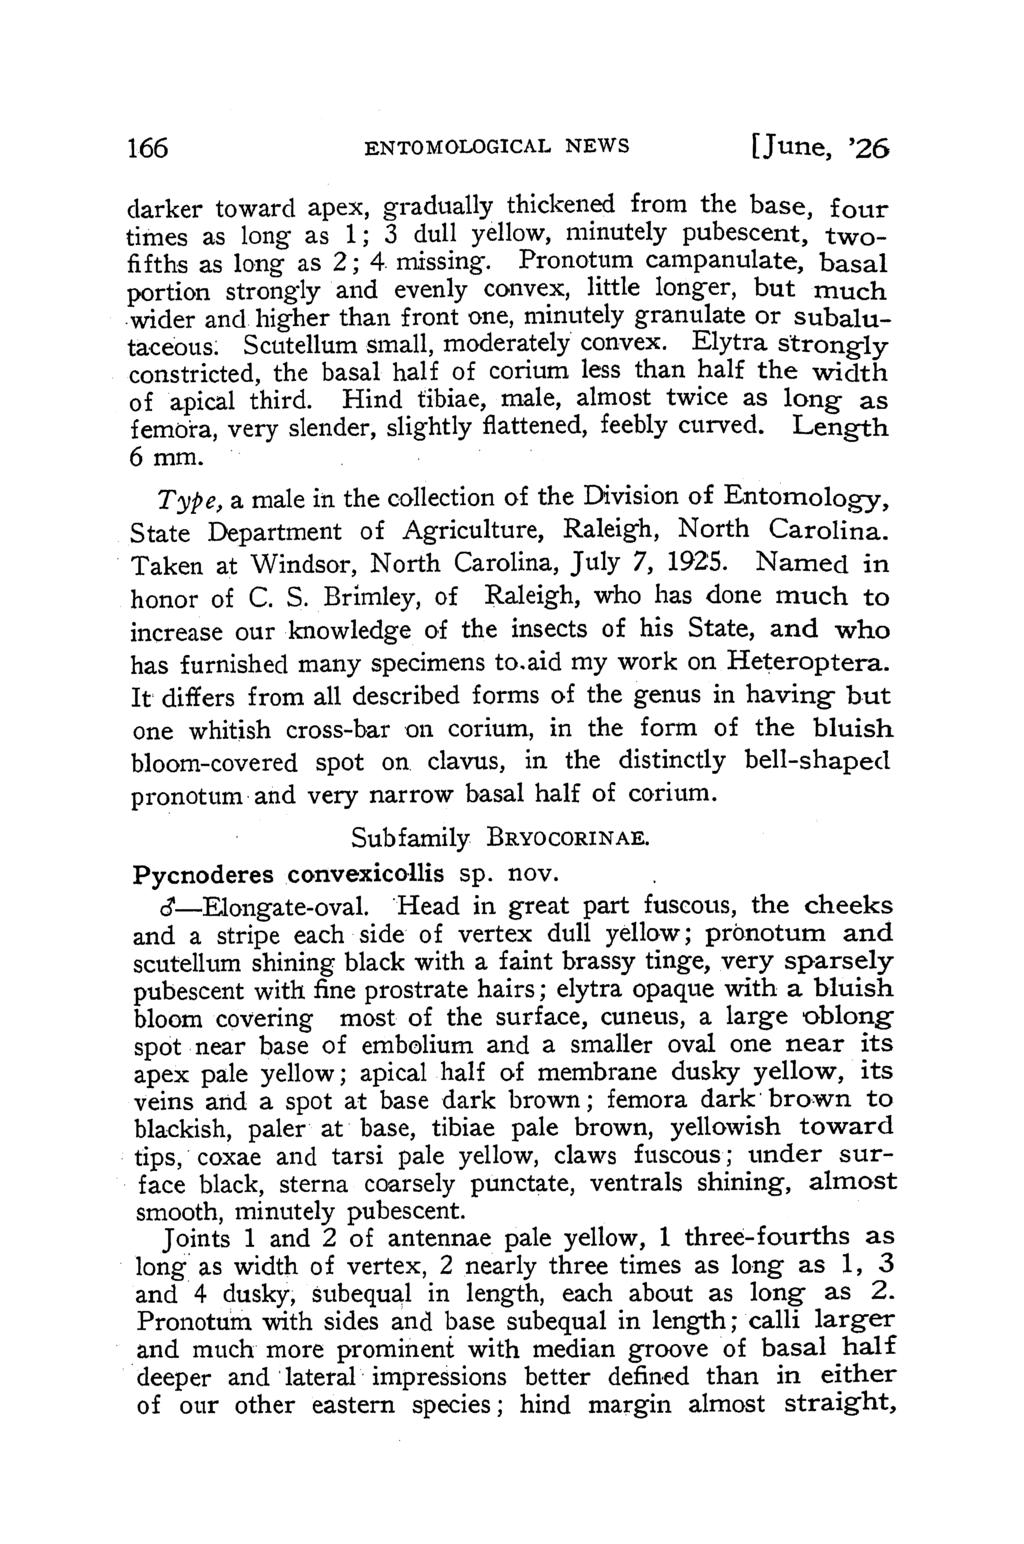 166 ENTOMOLOGICAL NEWS [June., '26 darker toward apex, gradually thickened from the base, four times as long as 1; 3 dull yellow, minutely pubescent, twofifths as long as 2; 4. missing.